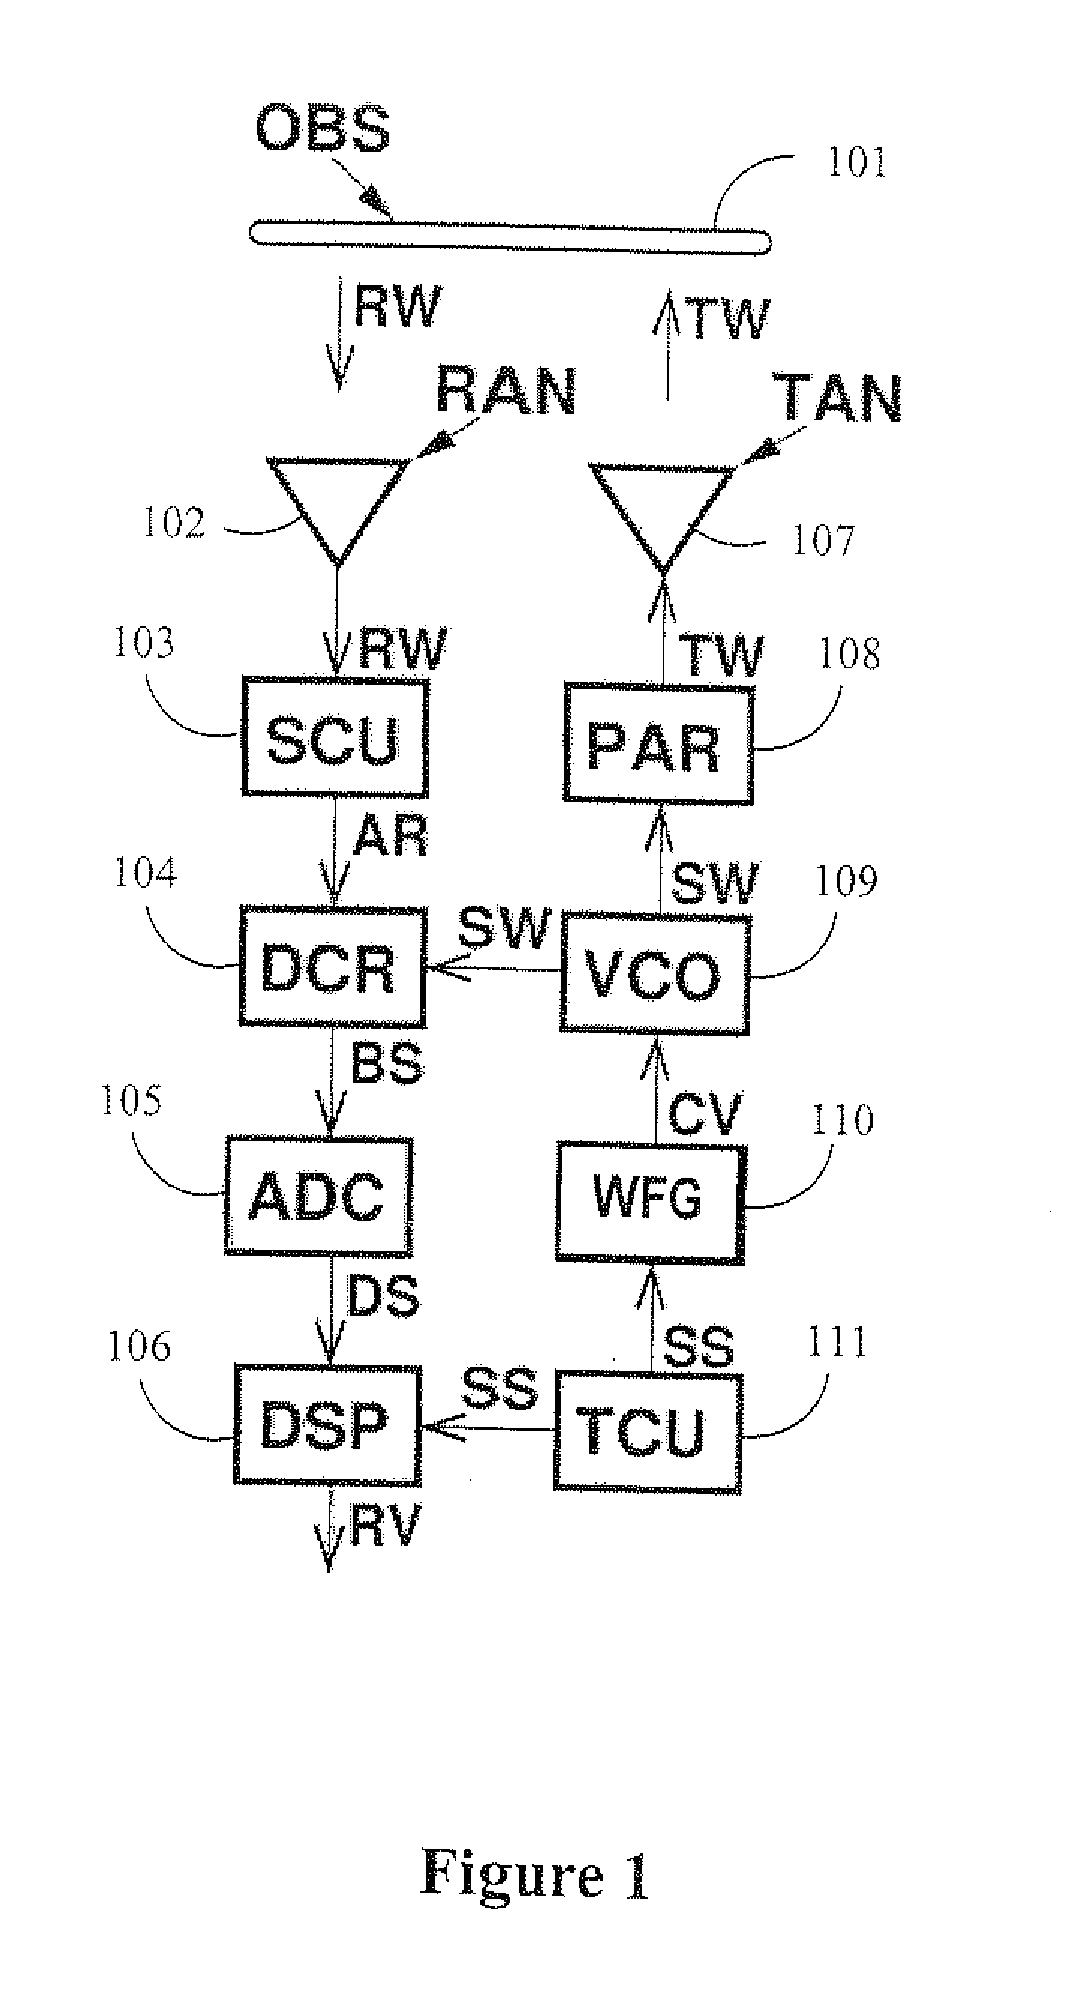 Automotive radar with radio-frequency interference avoidance